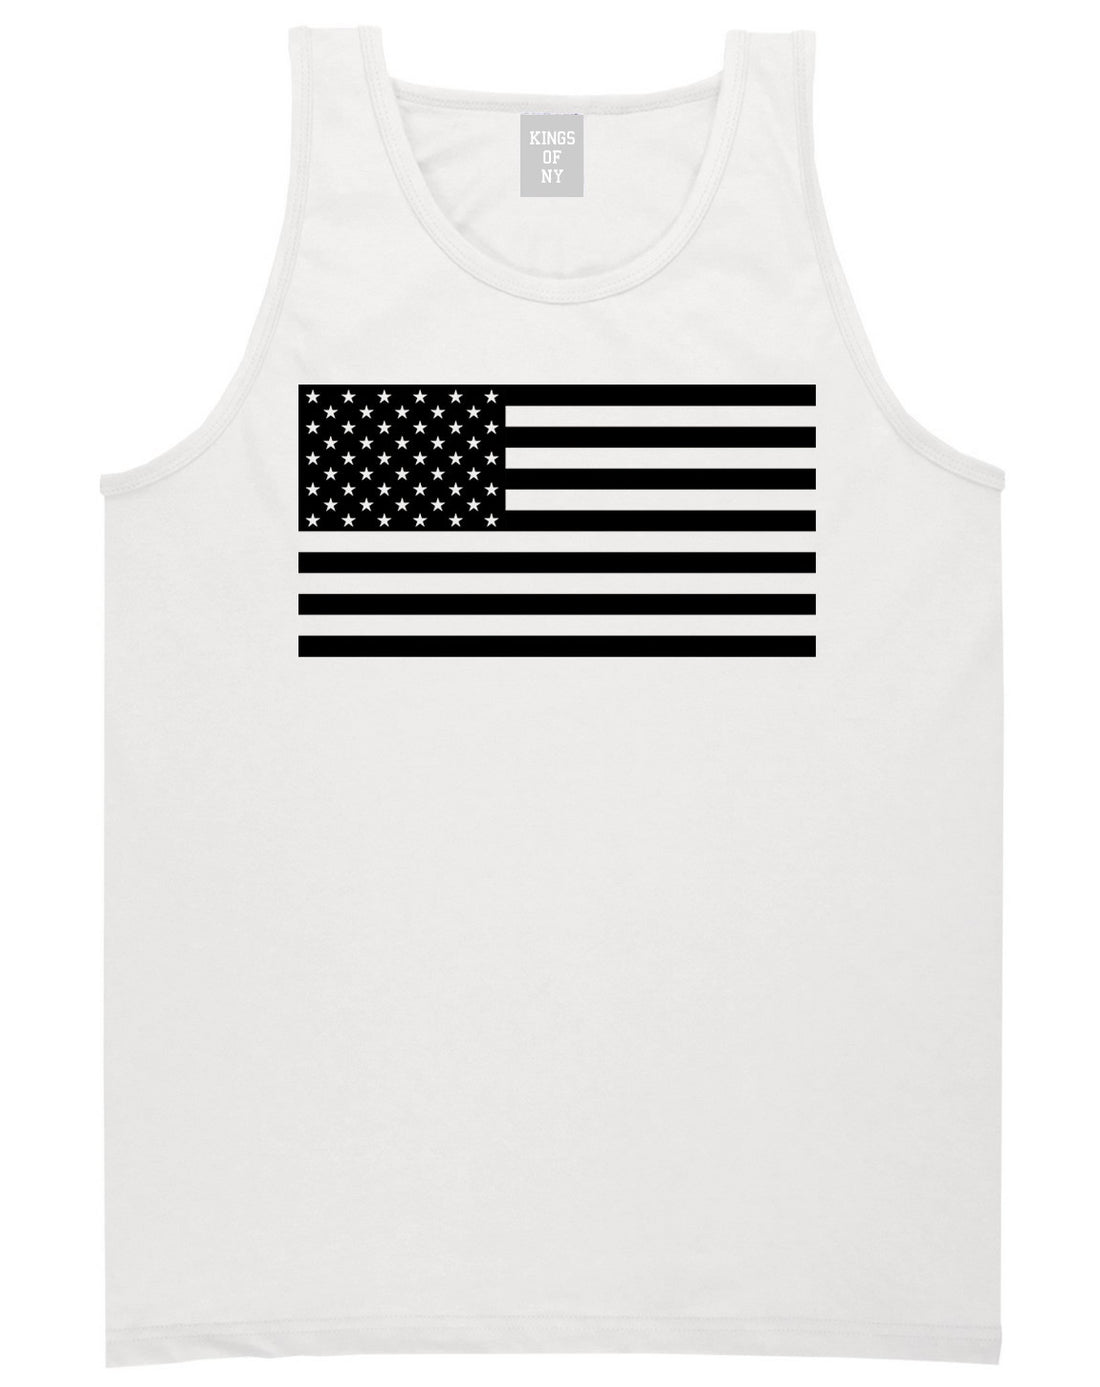 Kings Of NY American Flag Goth Style Tank Top in White